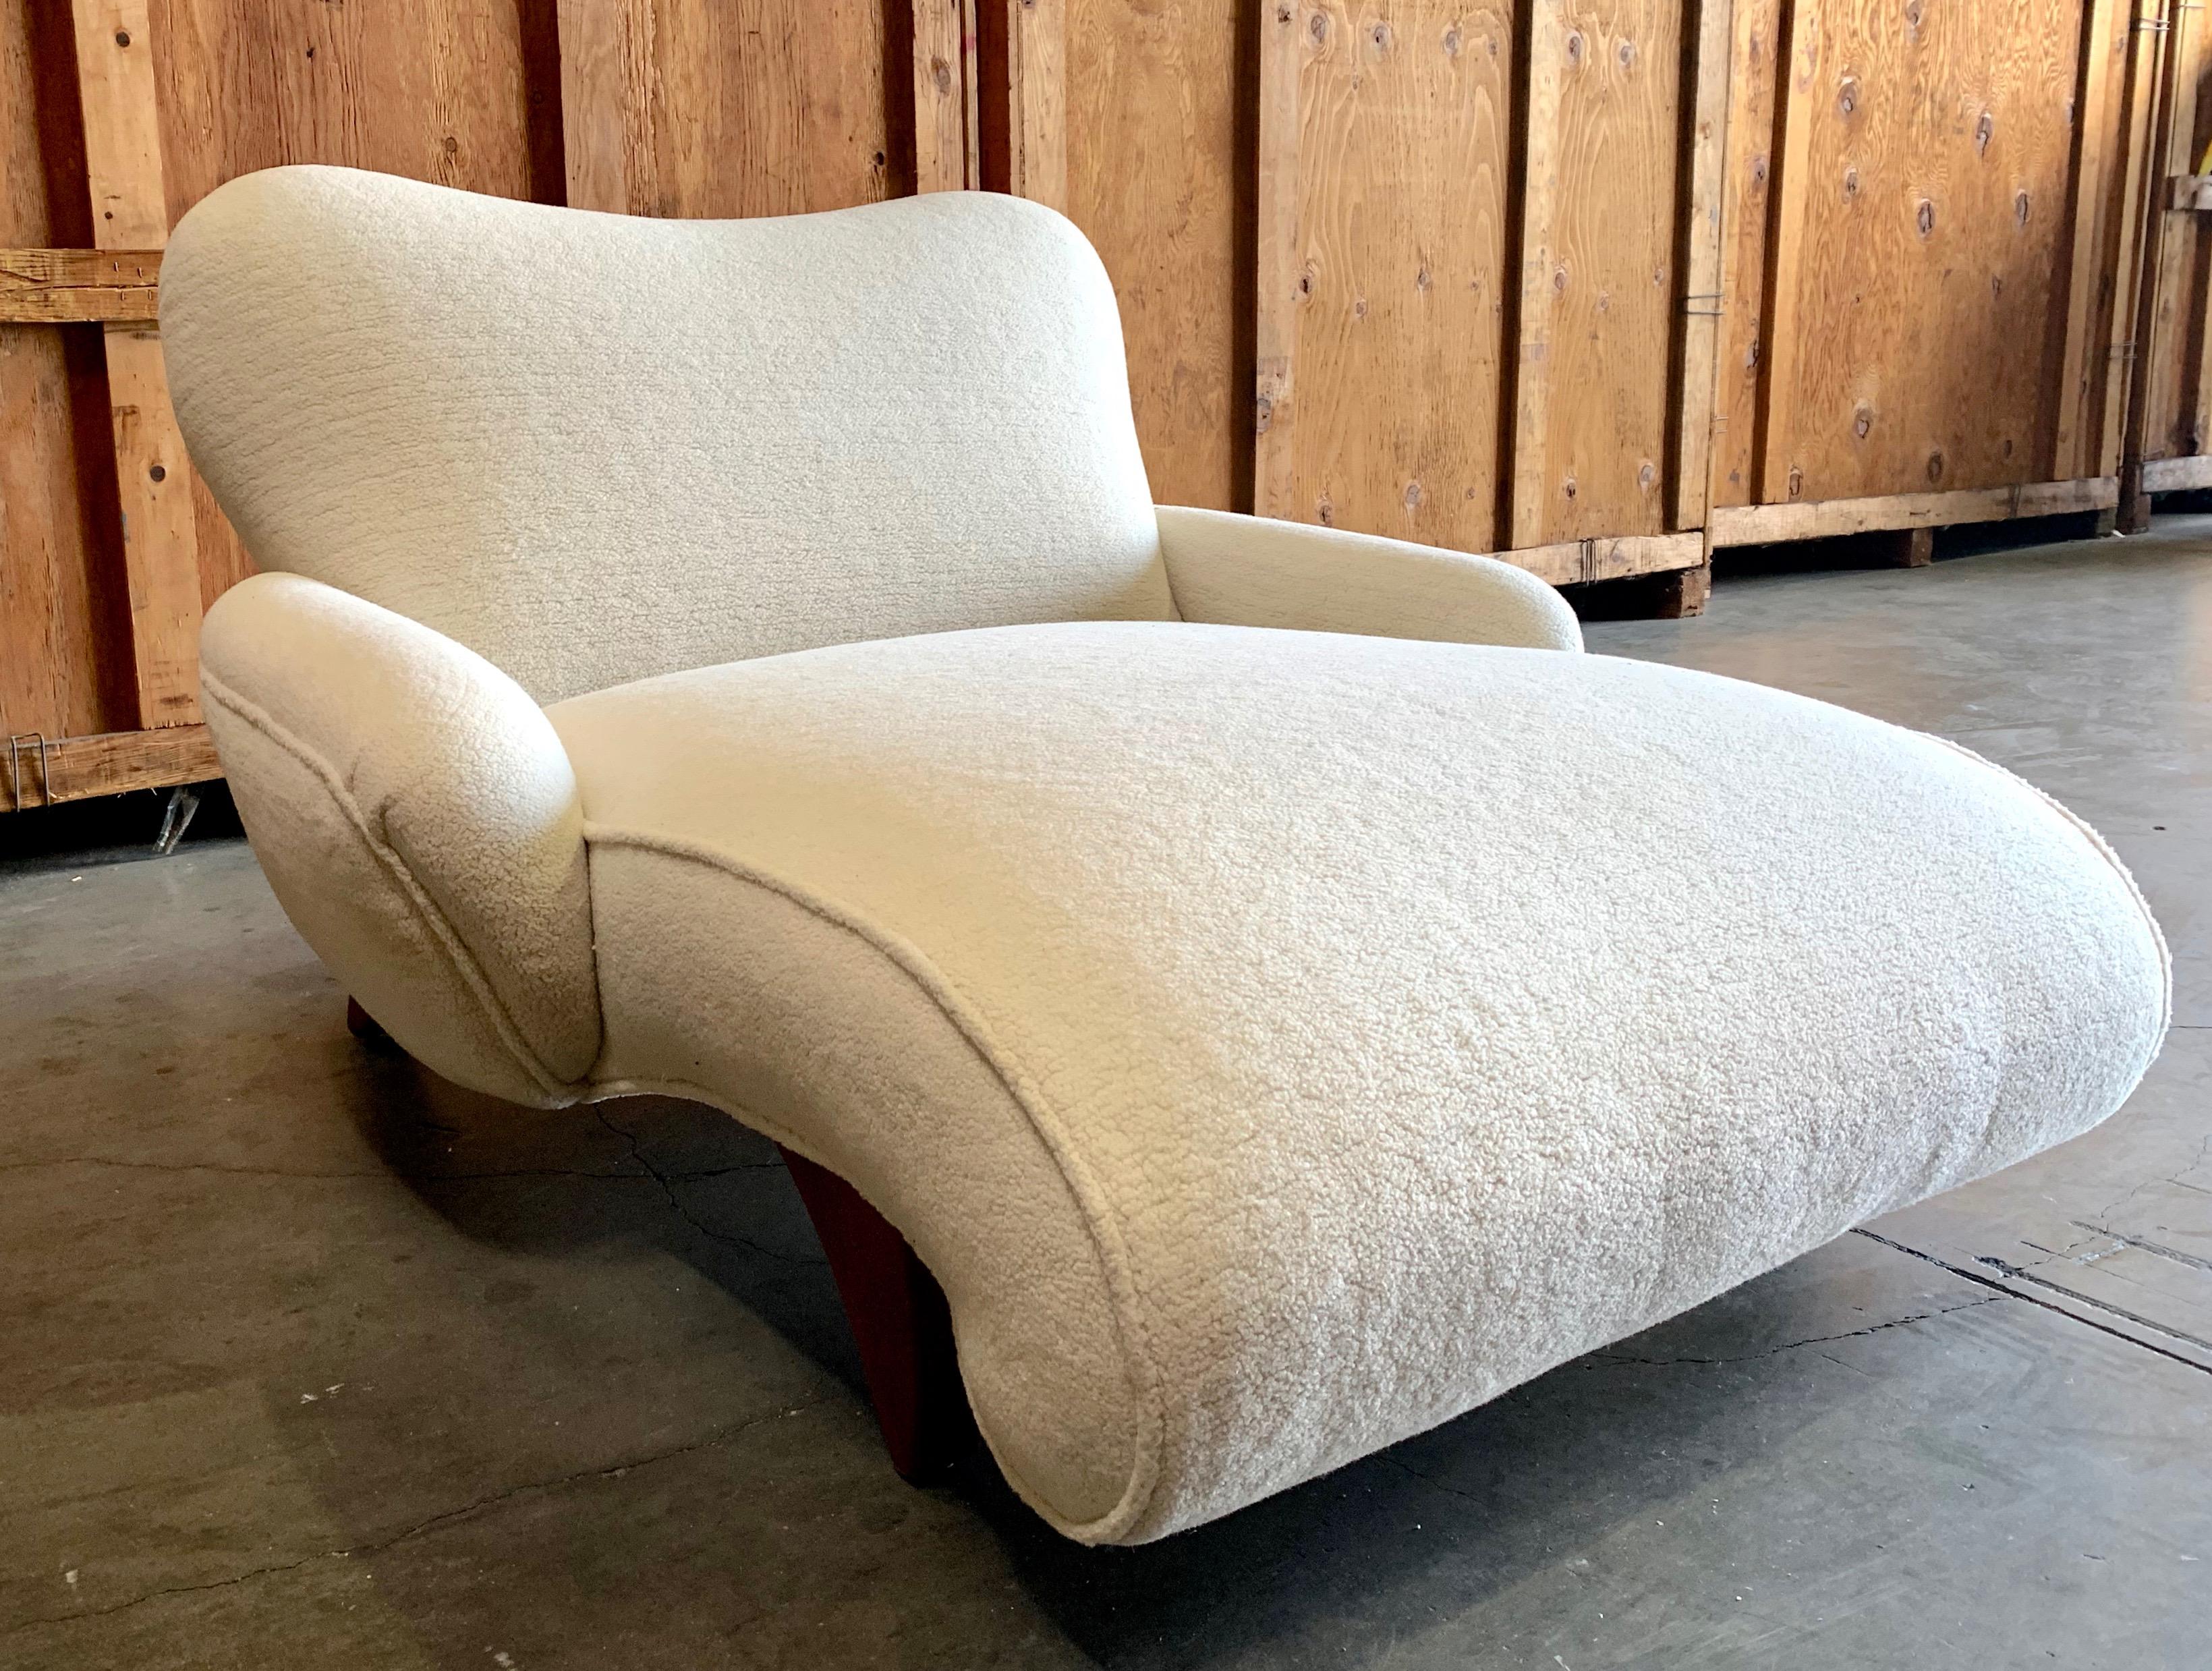 Whimsical early 20th century Italian chaise newly reupholstered in short sheepskin with monochromatic edge detailing.